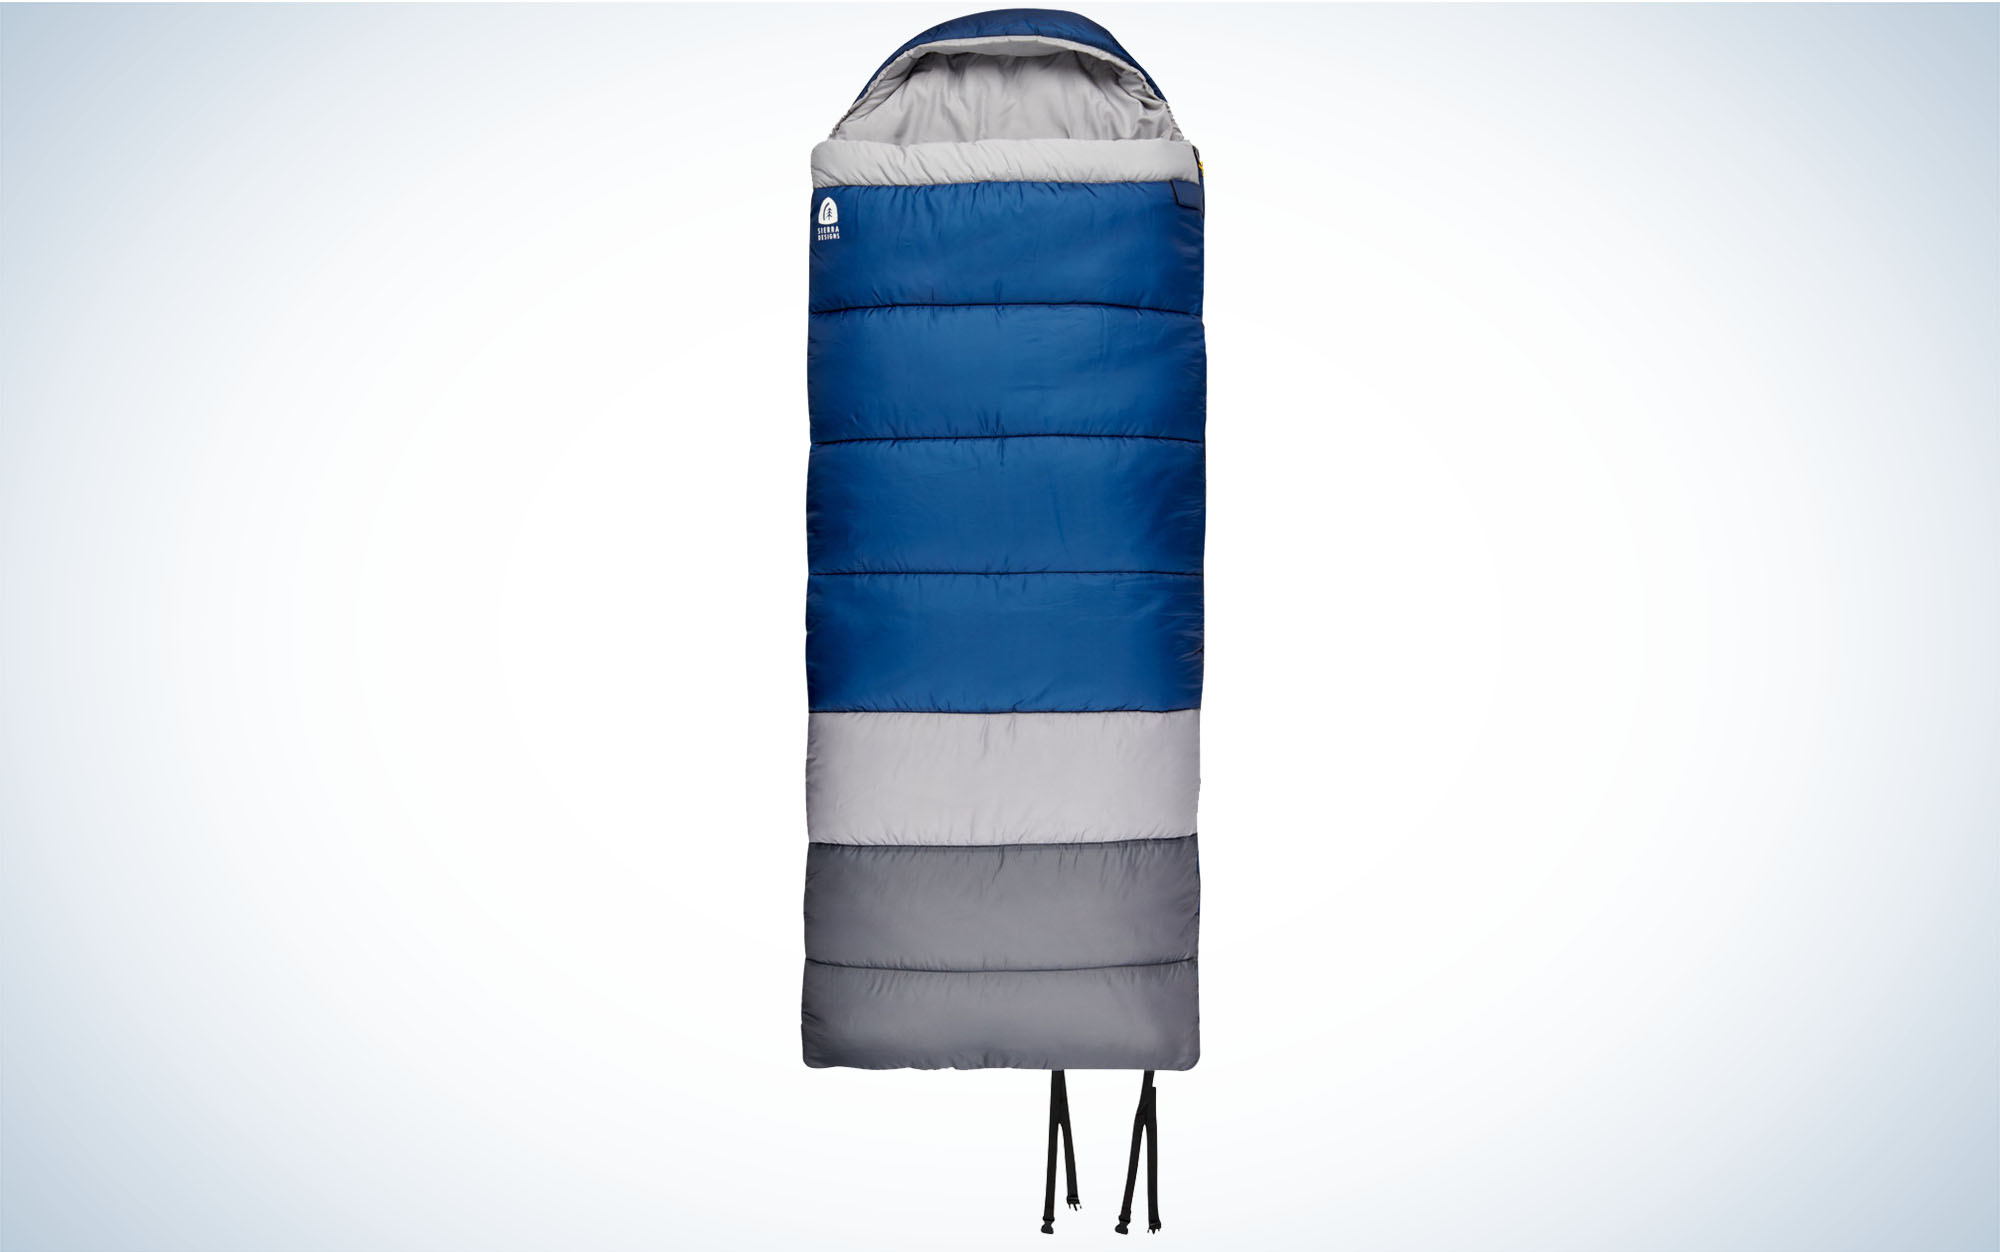 What's the best way to patch tears in down-filled nylon jackets and  sleeping bags like this? [pic] : r/CampingandHiking